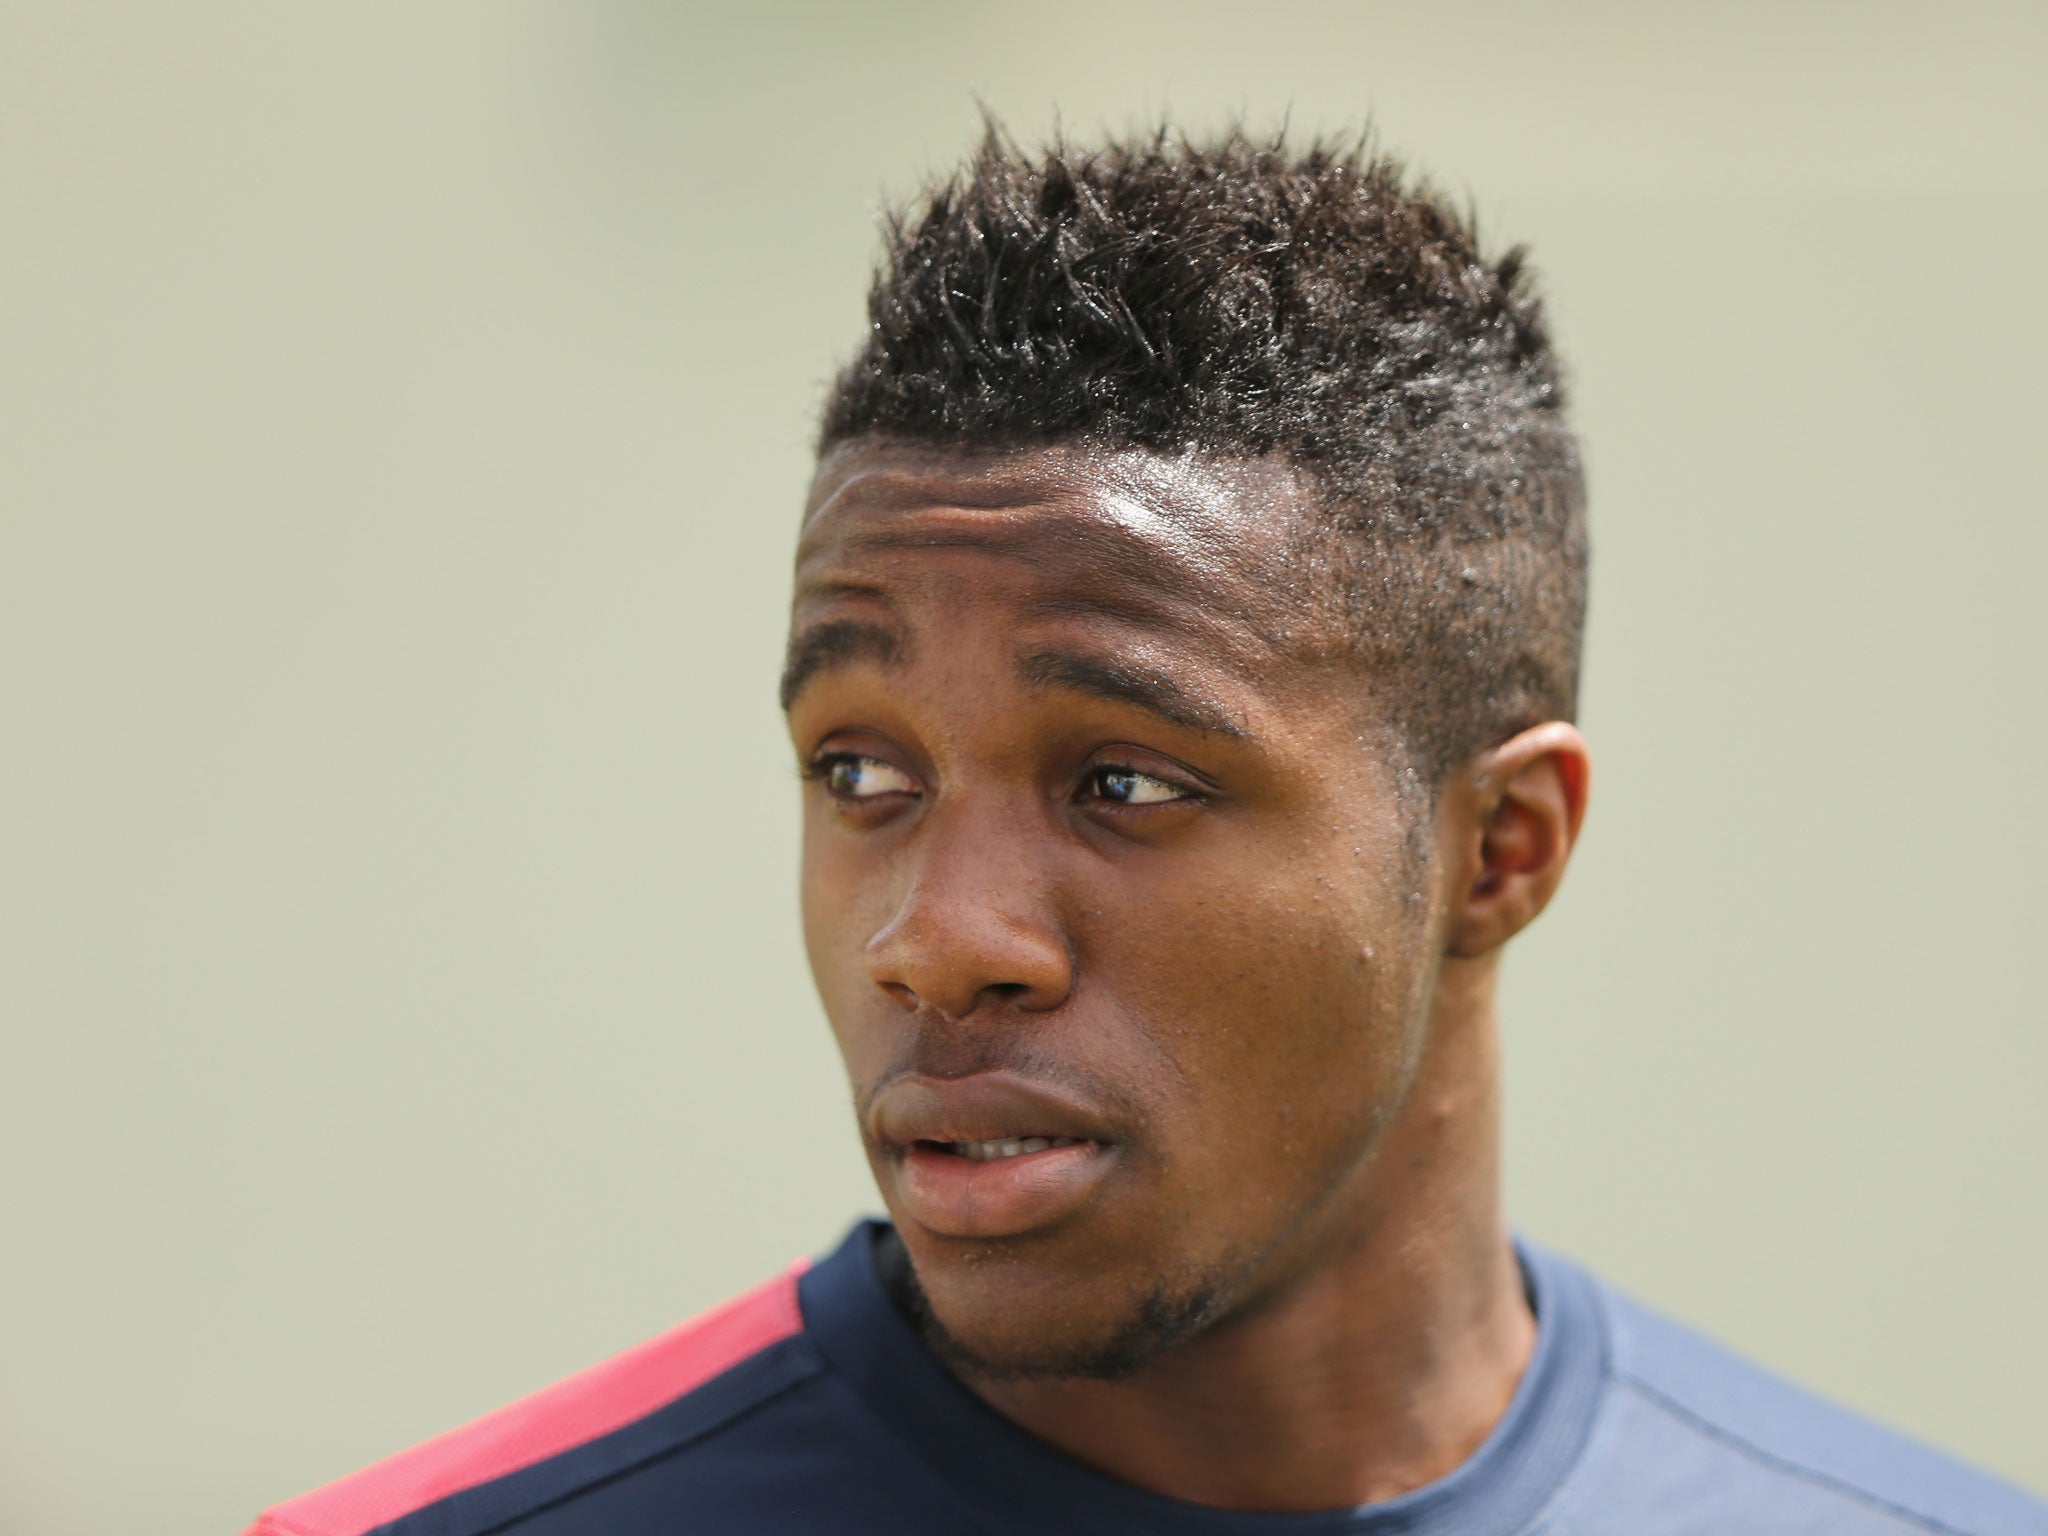 Stuart Pearce has admitted that he cannot be certain Wilfried Zaha will be fit to play in the opening European Championship group match against Italy in Tel Aviv